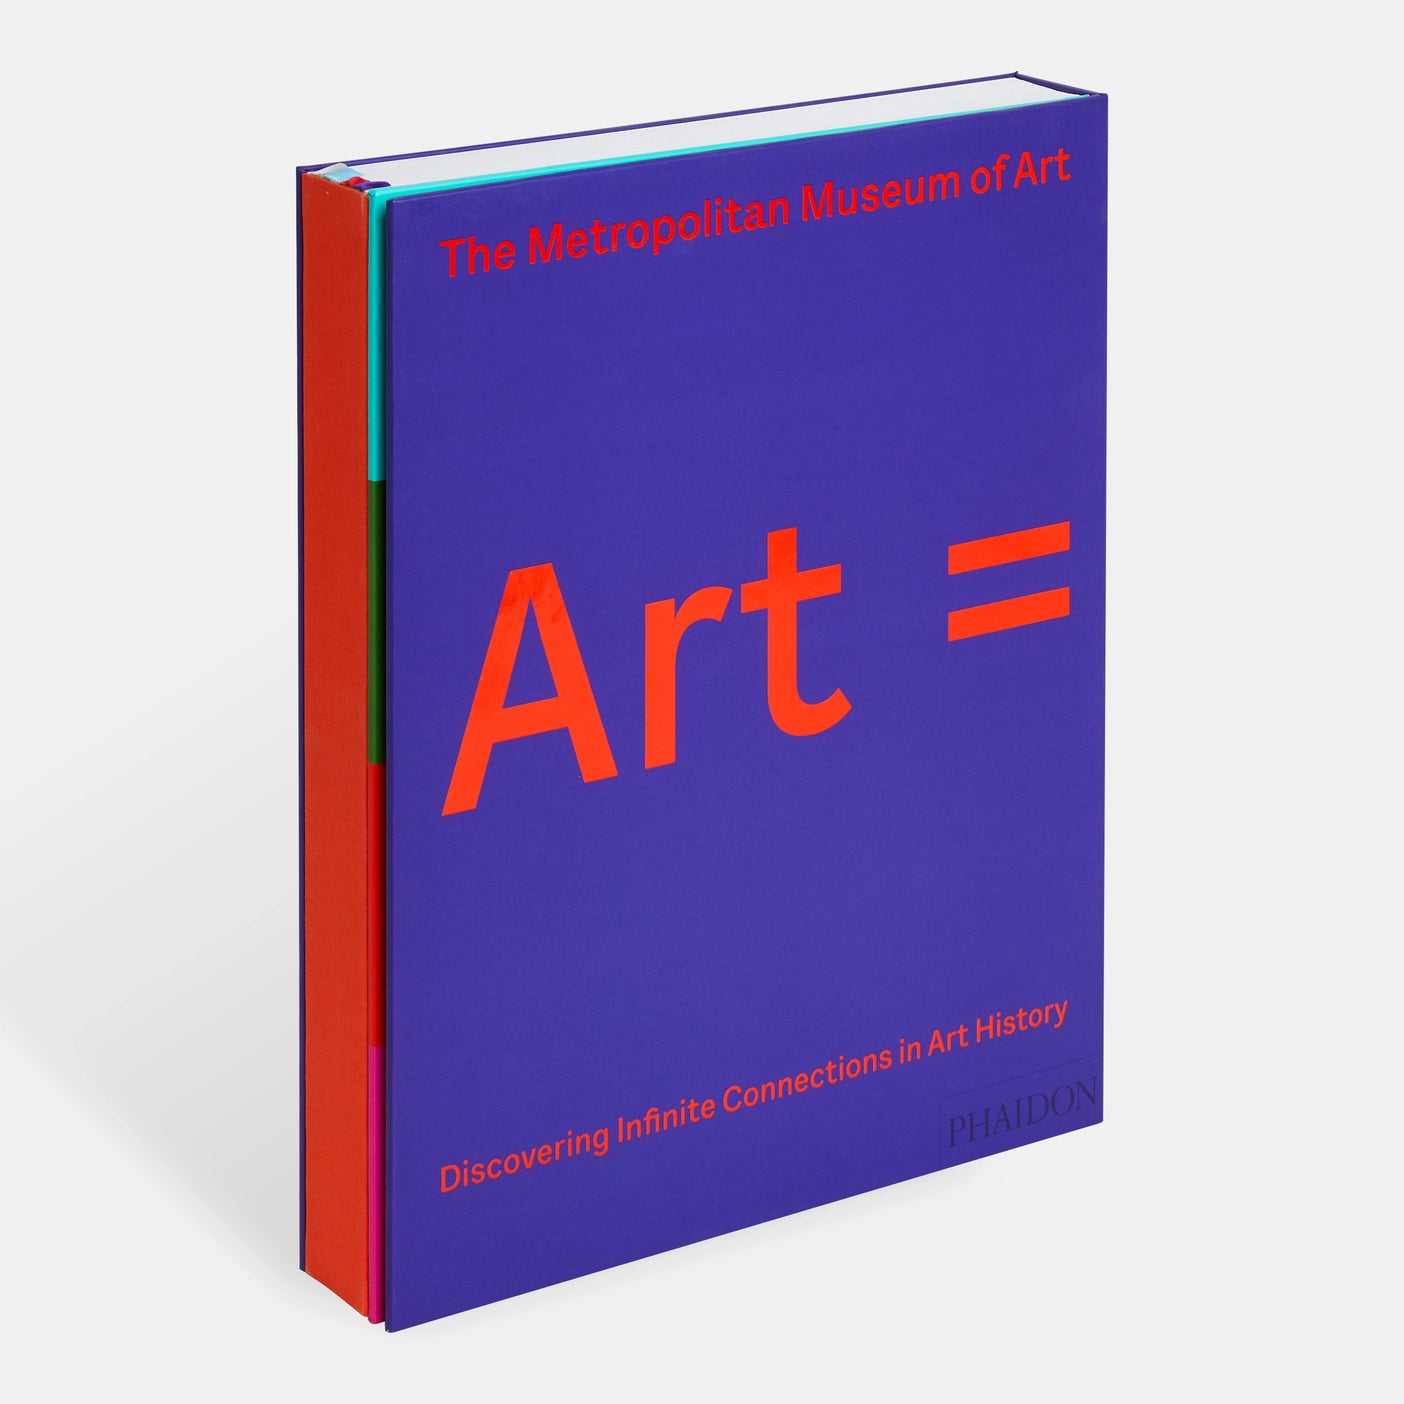 Art =: Discovering Infinite Connections in Art History (pre-order)